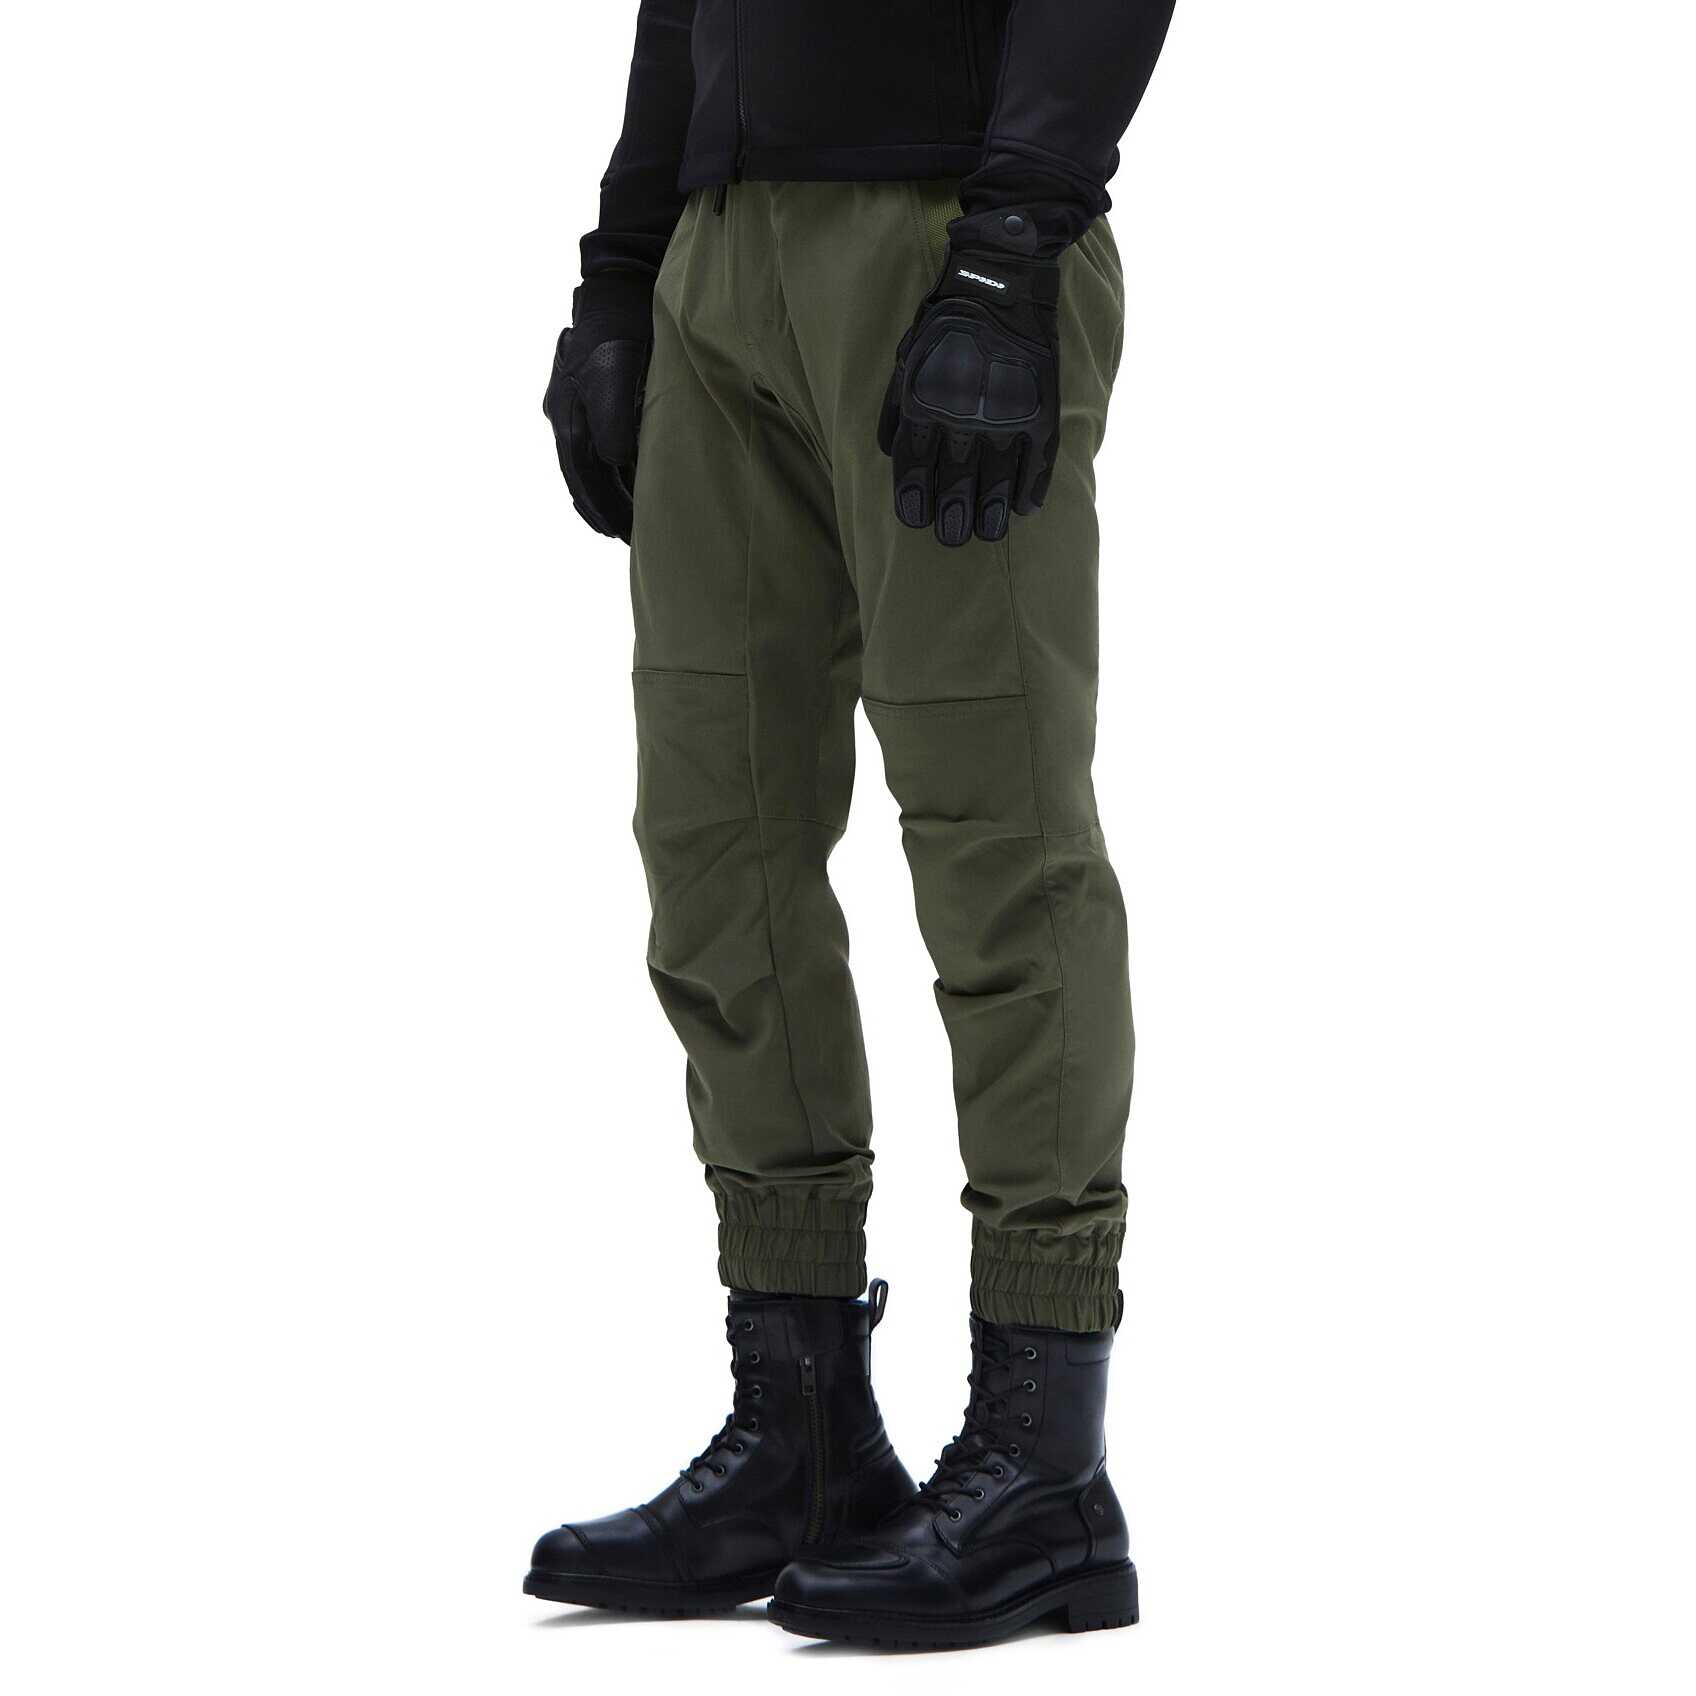 Spidi MOTO JOGGER Military Motorcycle Pants For Sale Online